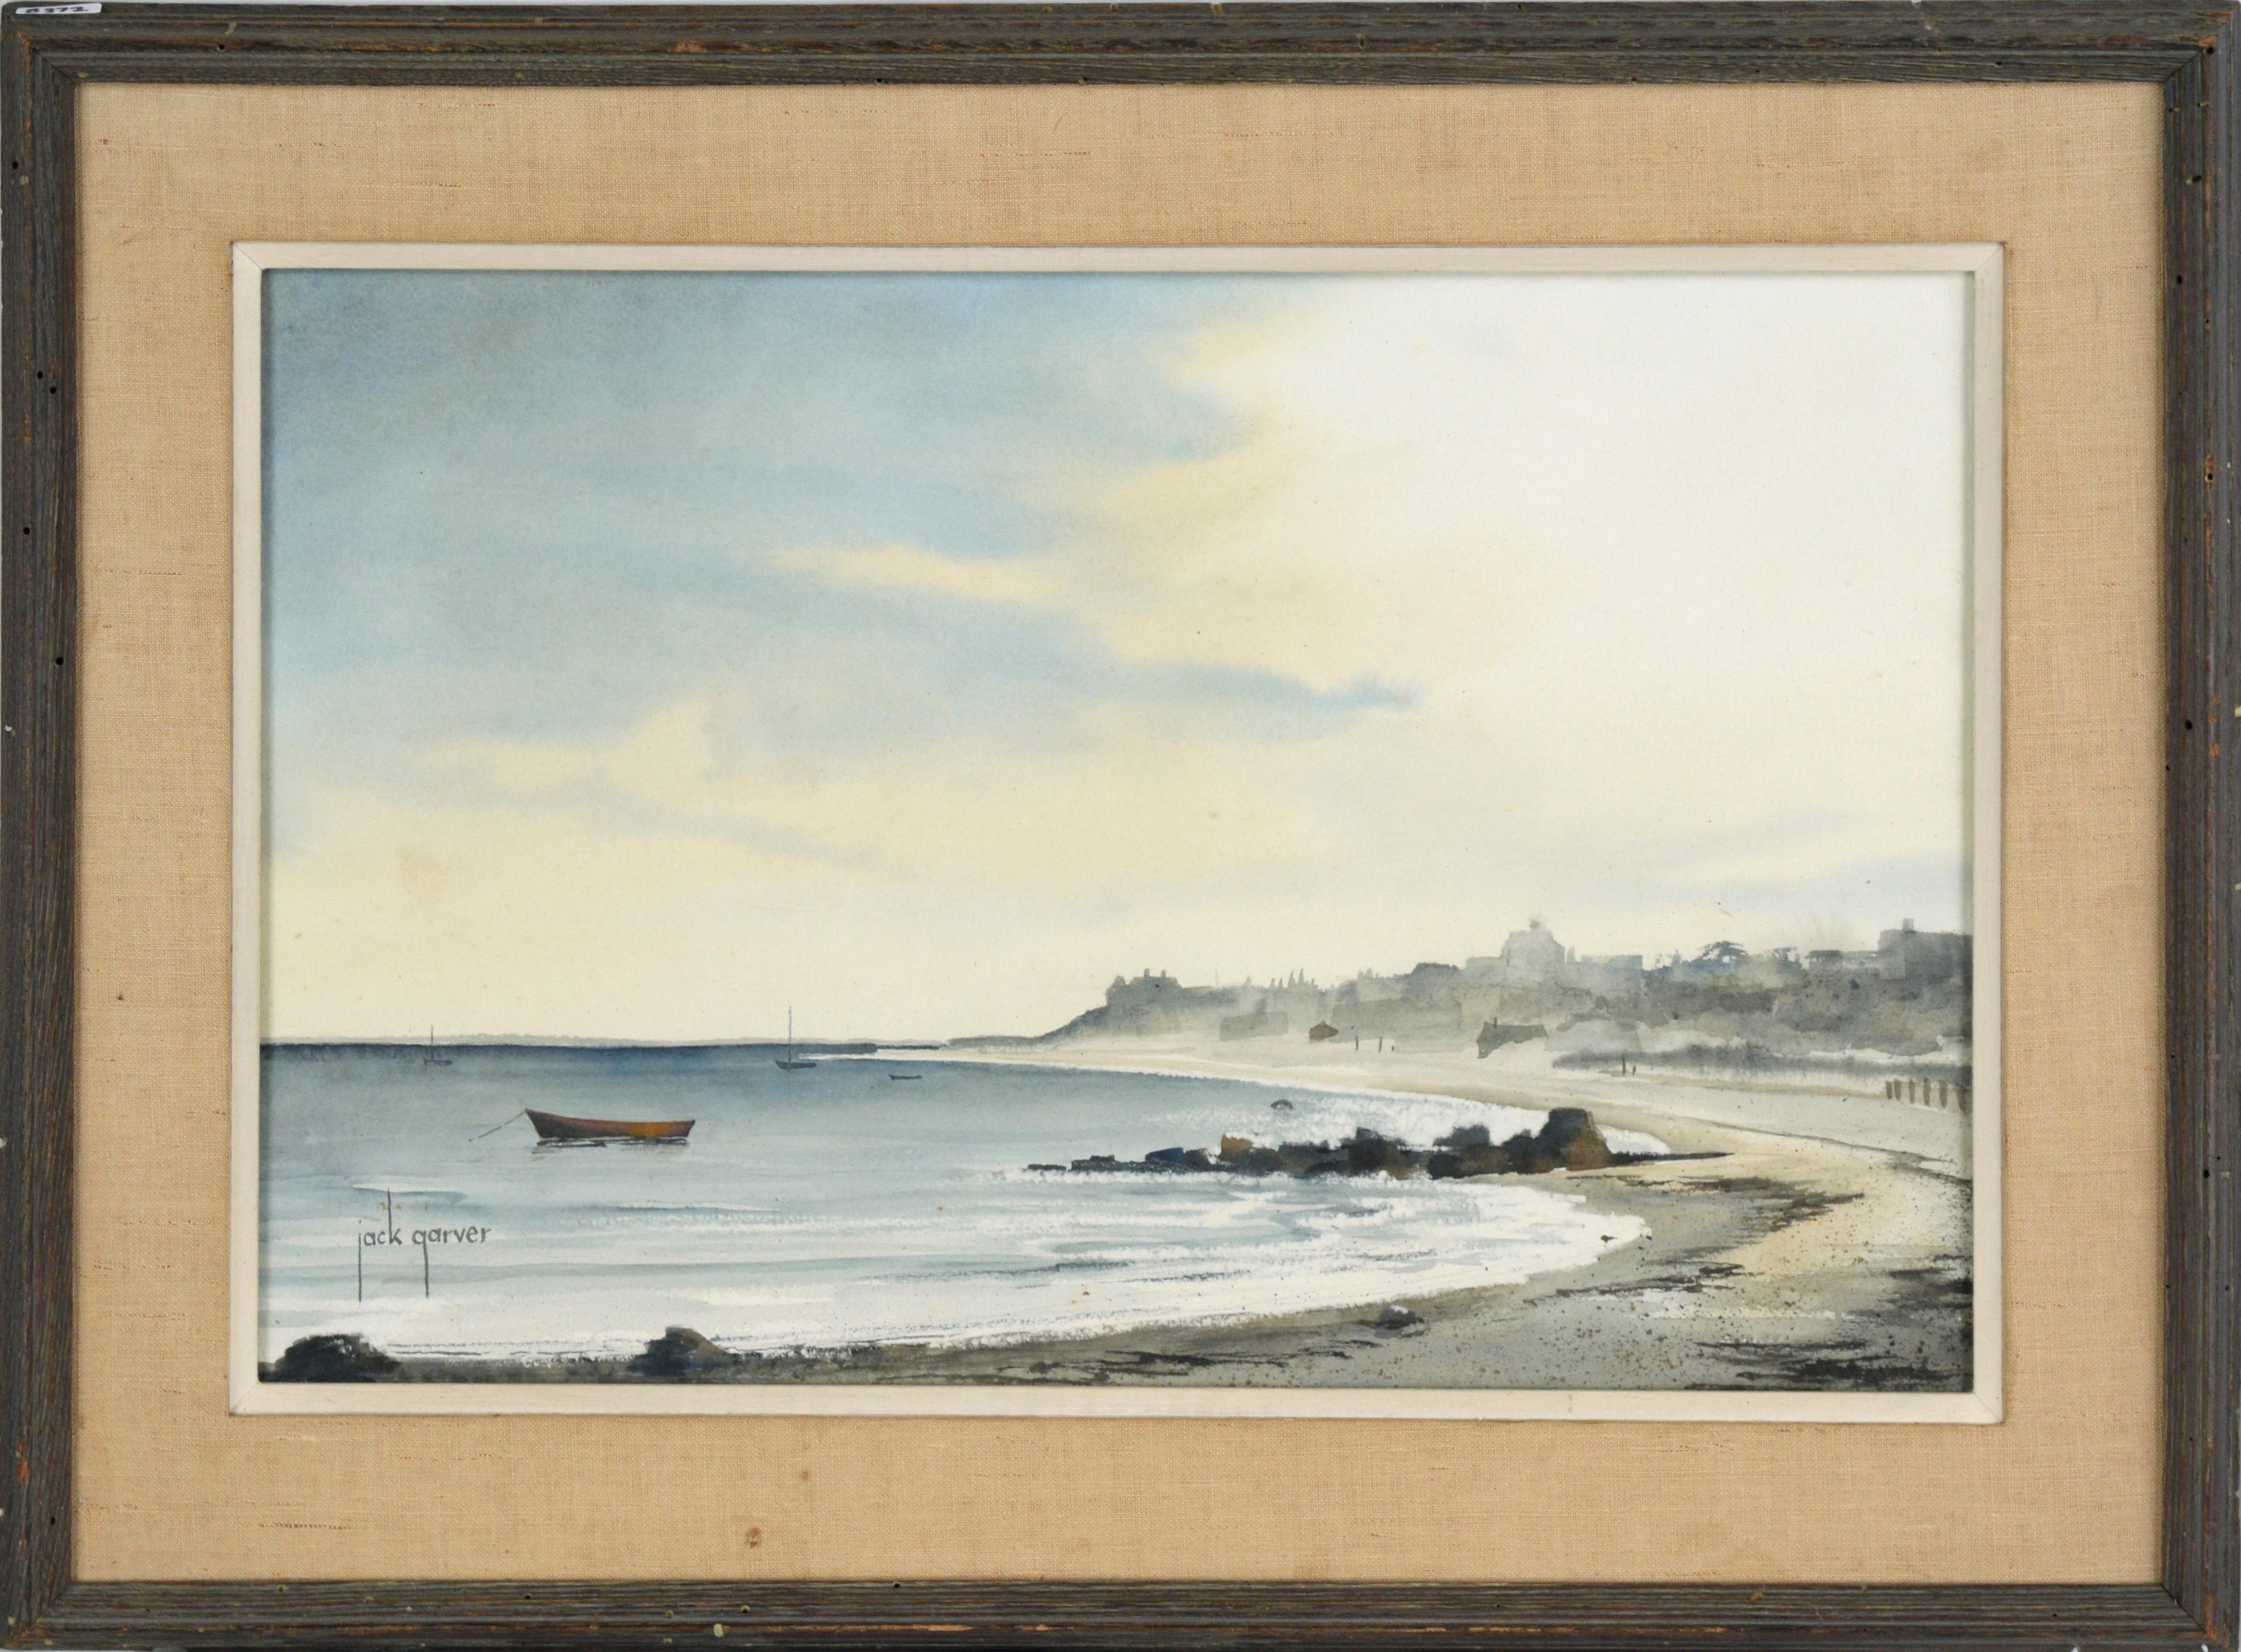 Jack Garver Landscape Painting - Boats Along the Shore - Coastal Seascape in Watercolor on Paper